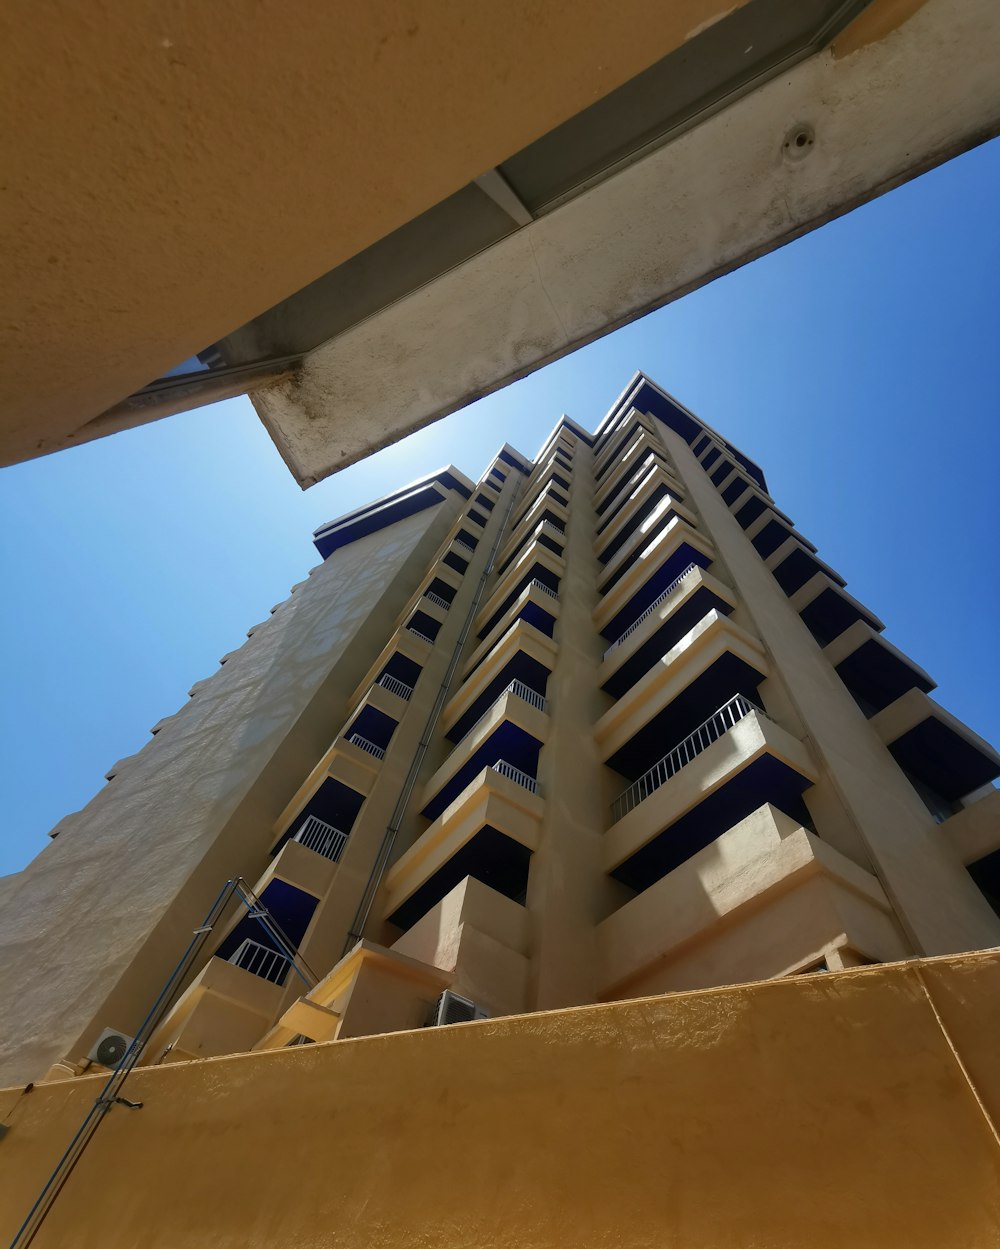 looking up at a tall building with balconies